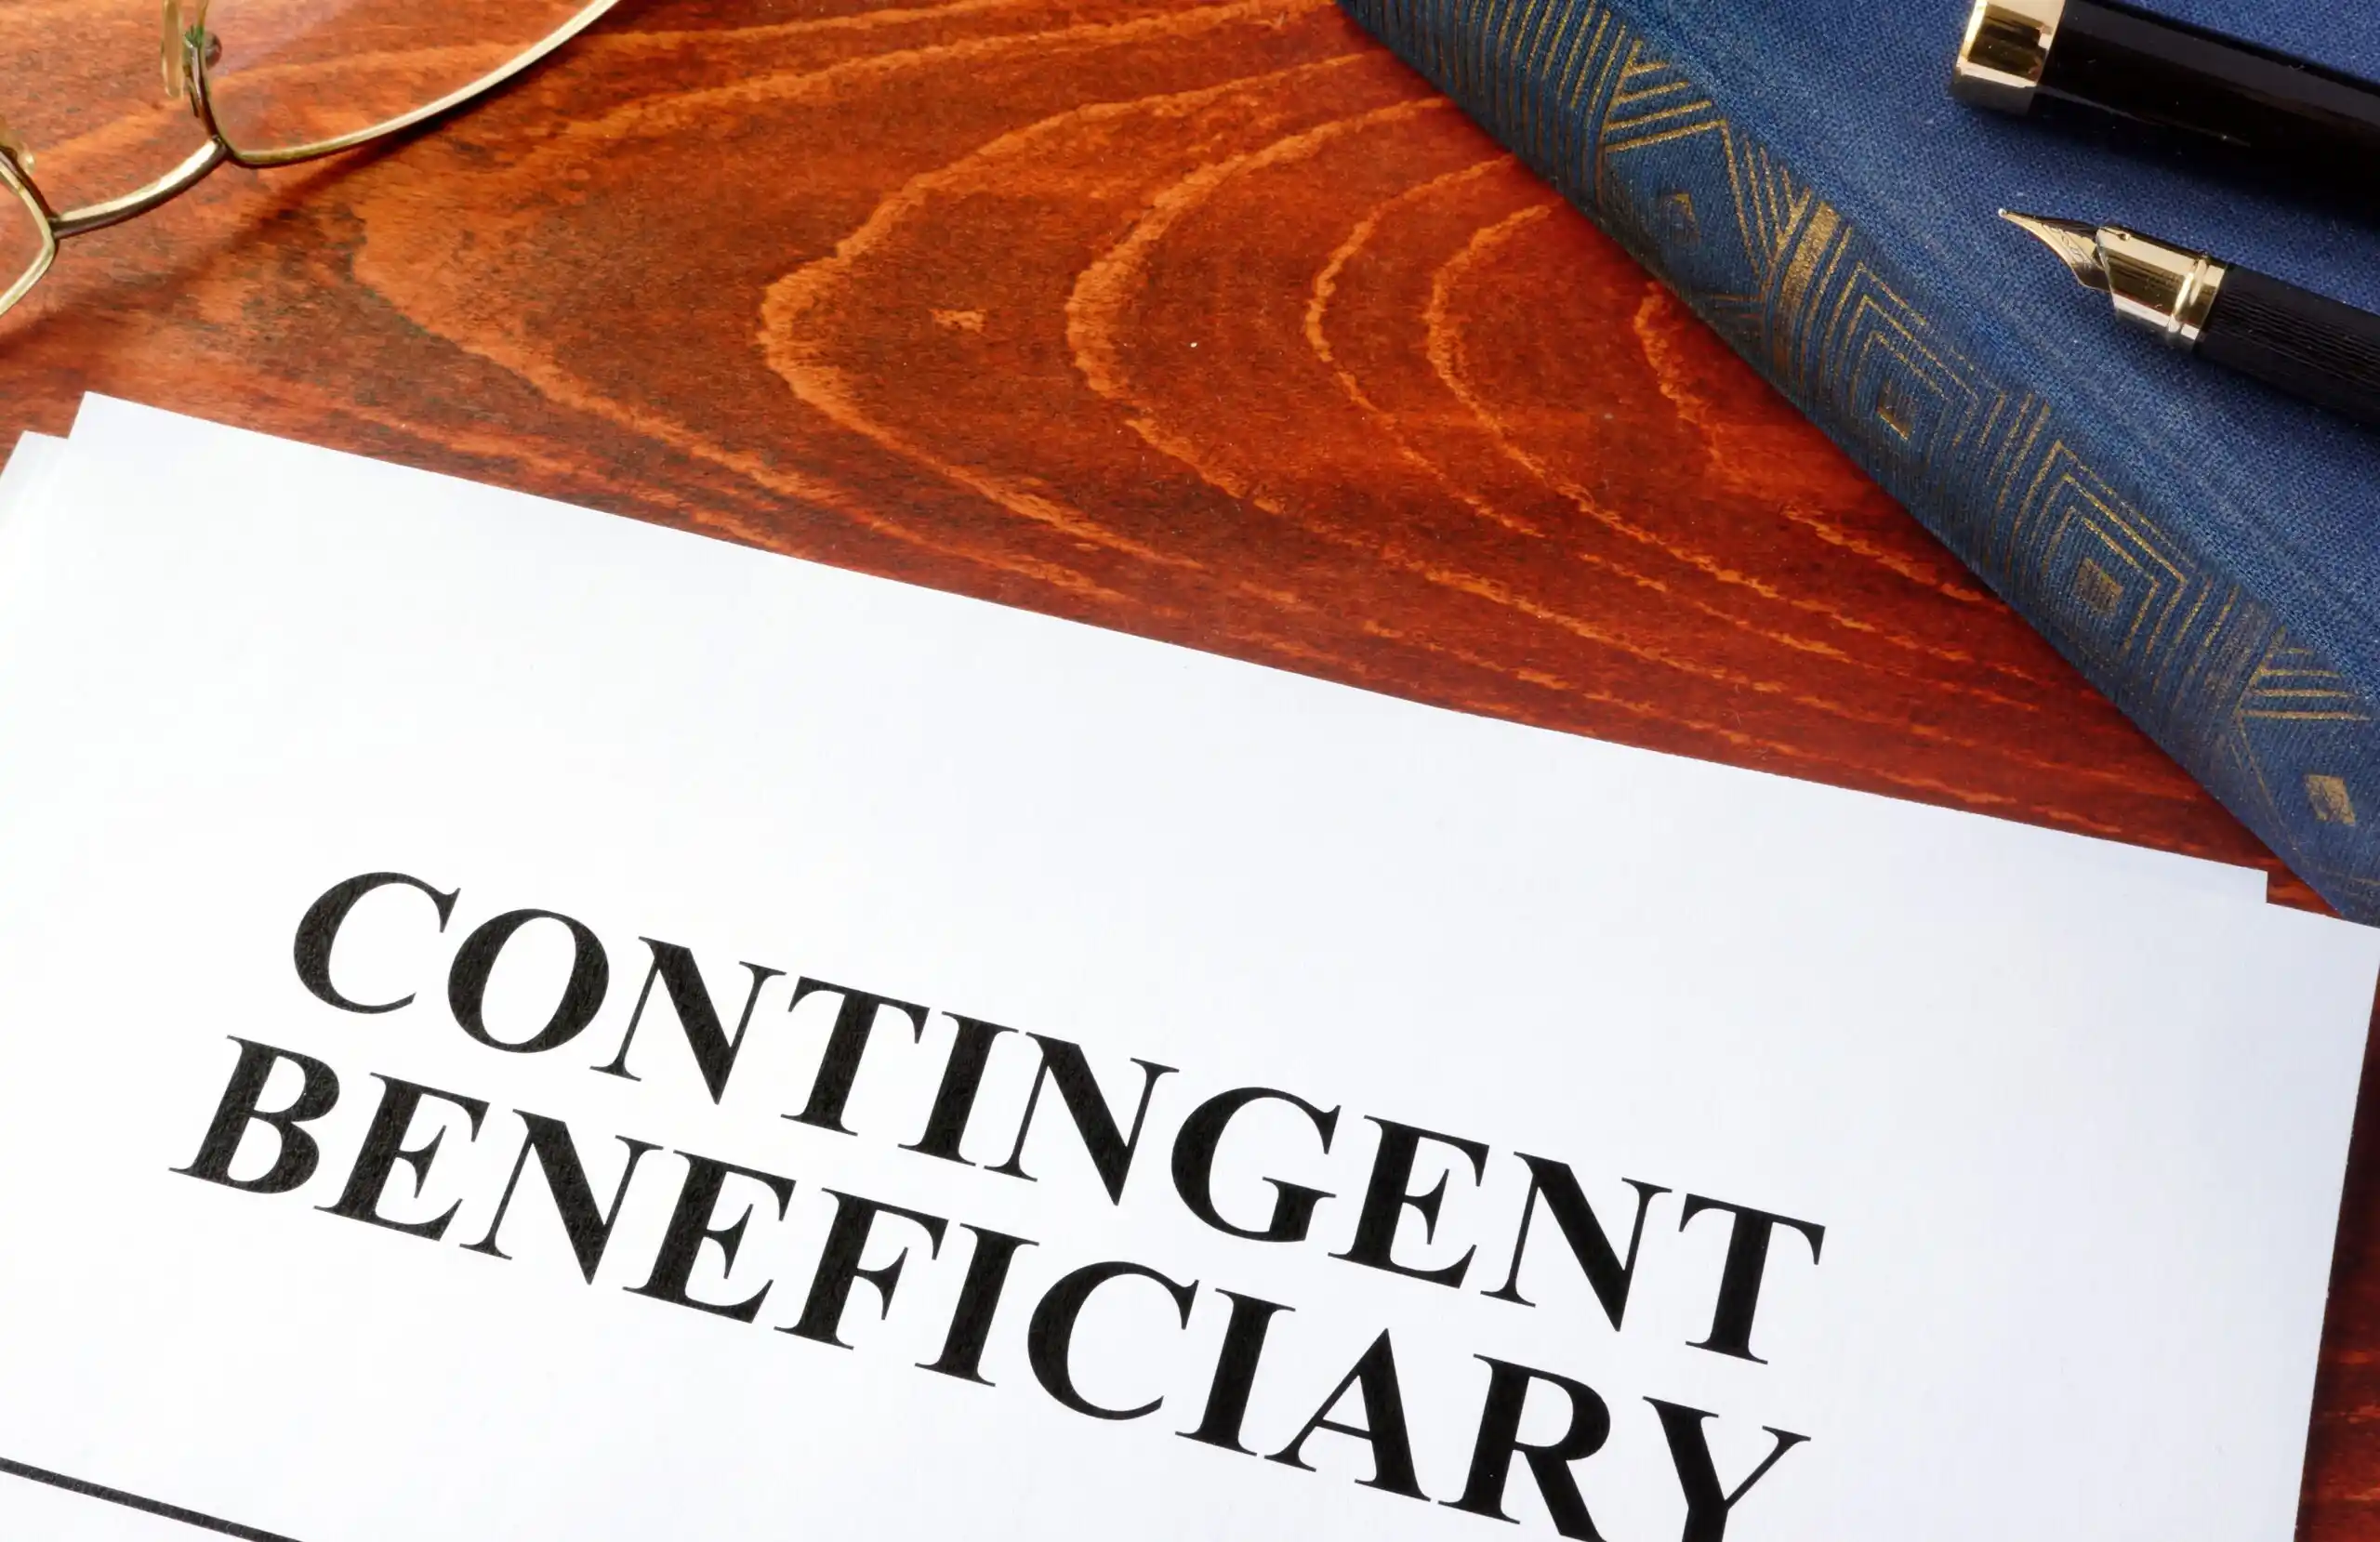 Contingent Beneficiary Paperwork